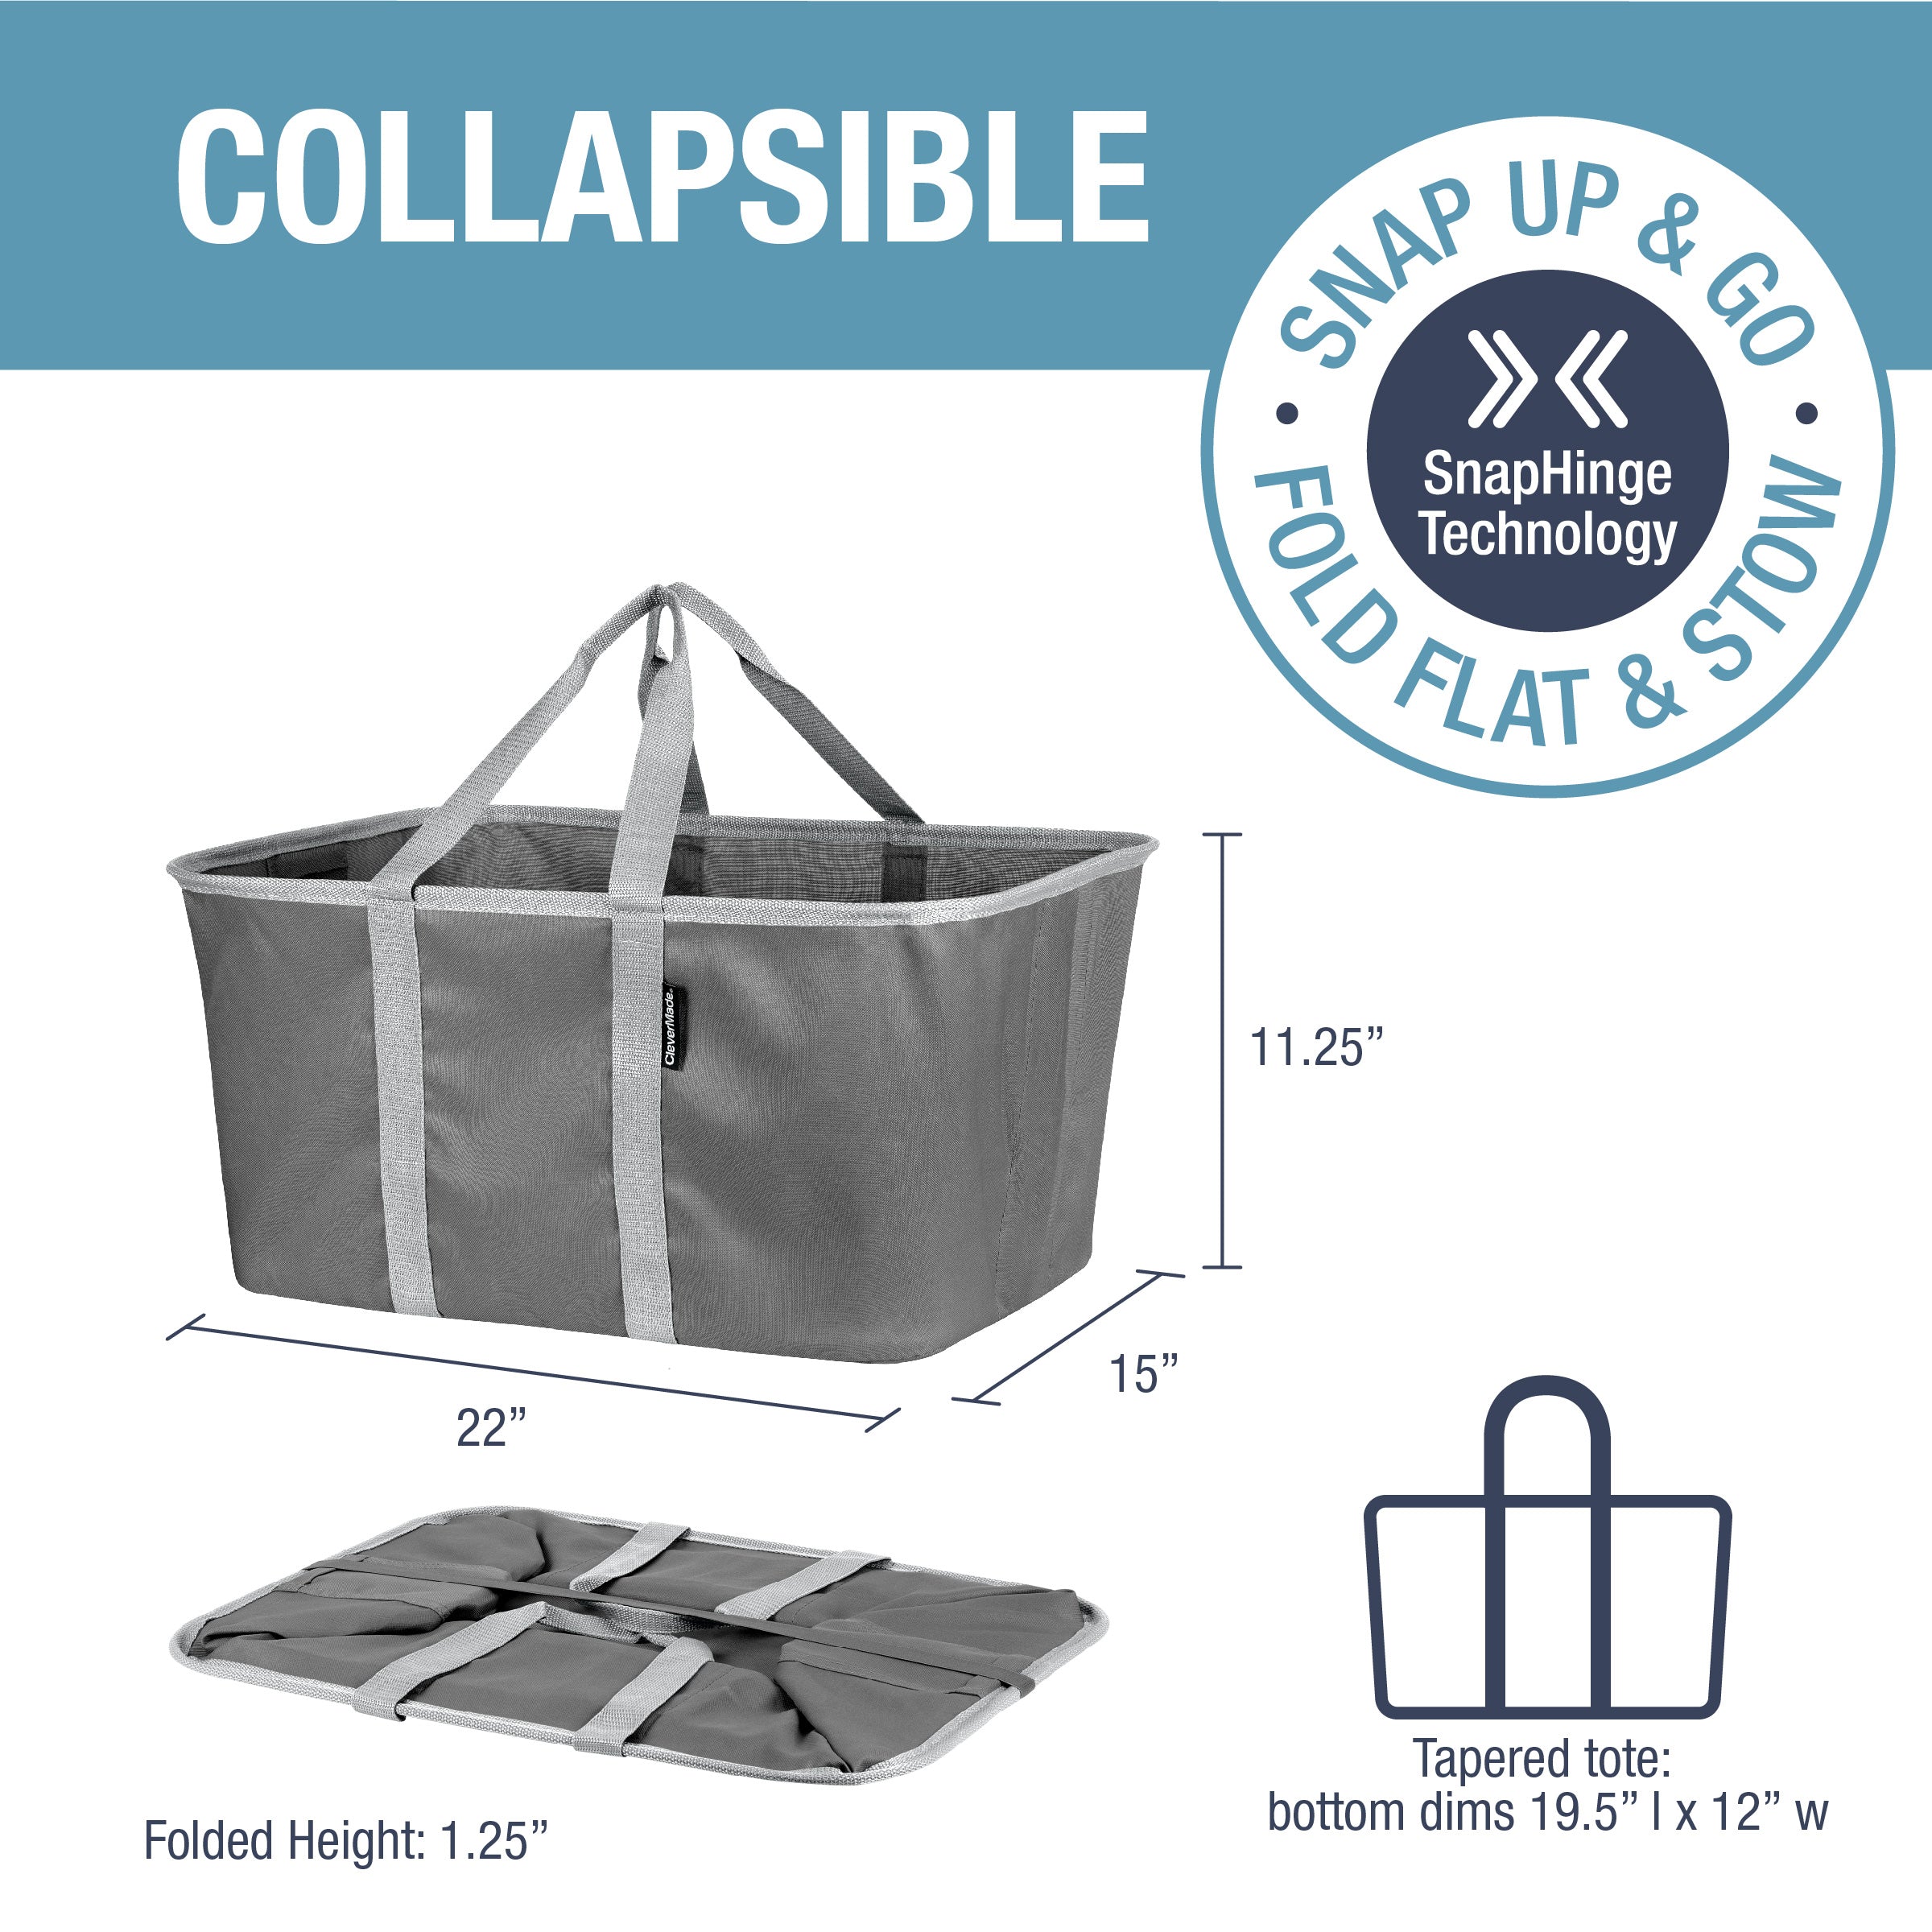 Could you use one of these collapsible laundry baskets from Costco